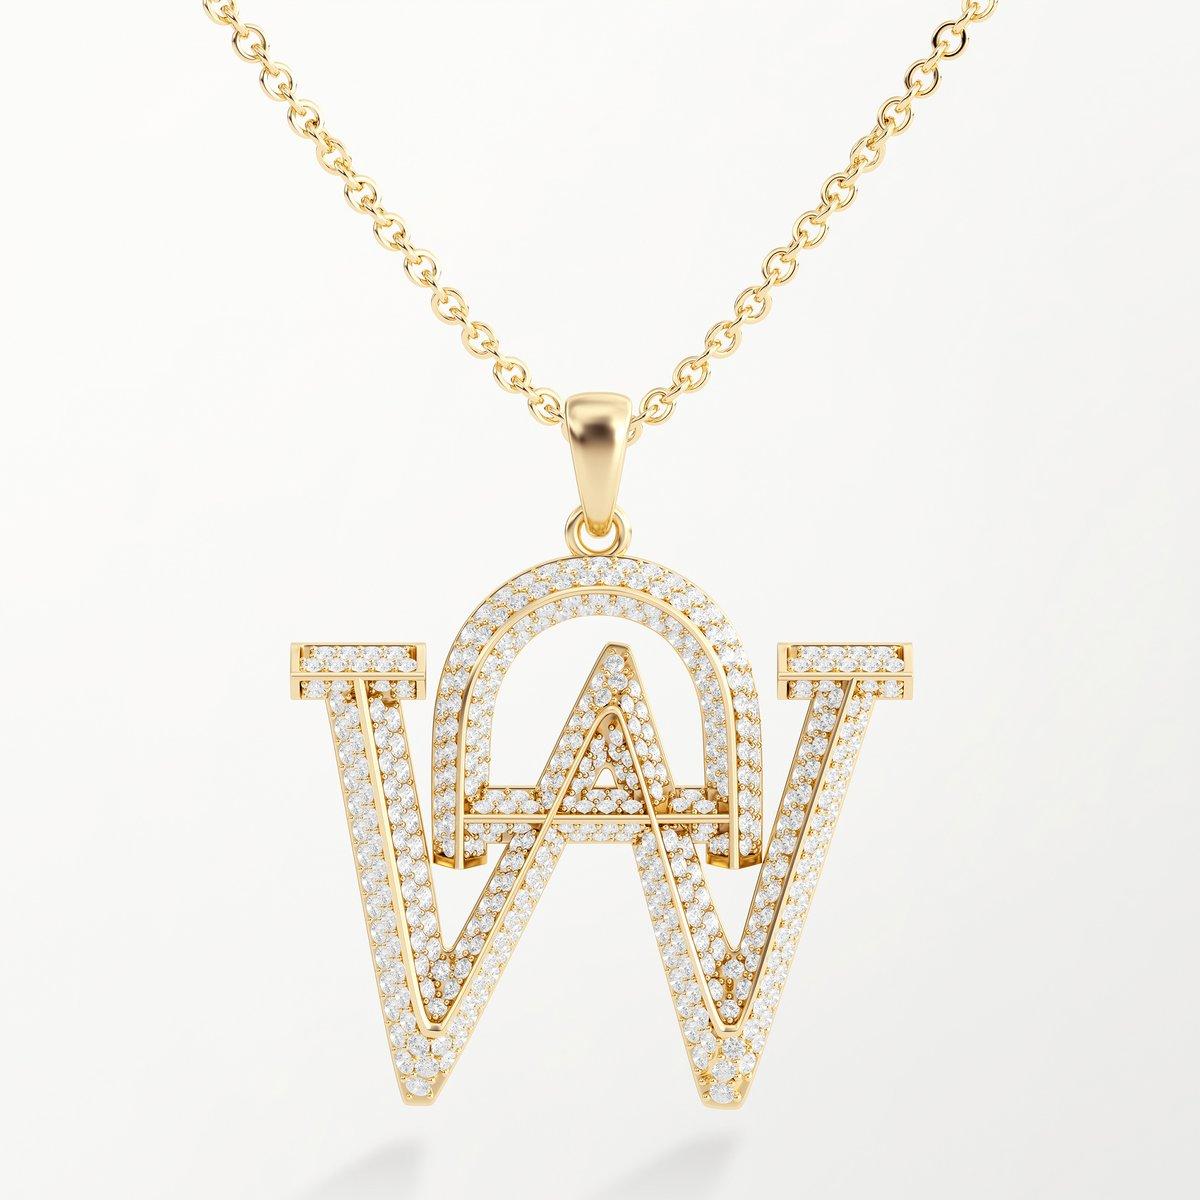 Intention: Proudly You

Design: Give us two letters and we'll create your customized initial pendant necklace with pave diamonds. Personalize your style by selecting from yellow, white or rose gold and length of chain. 

Style Suggestion: ﻿This